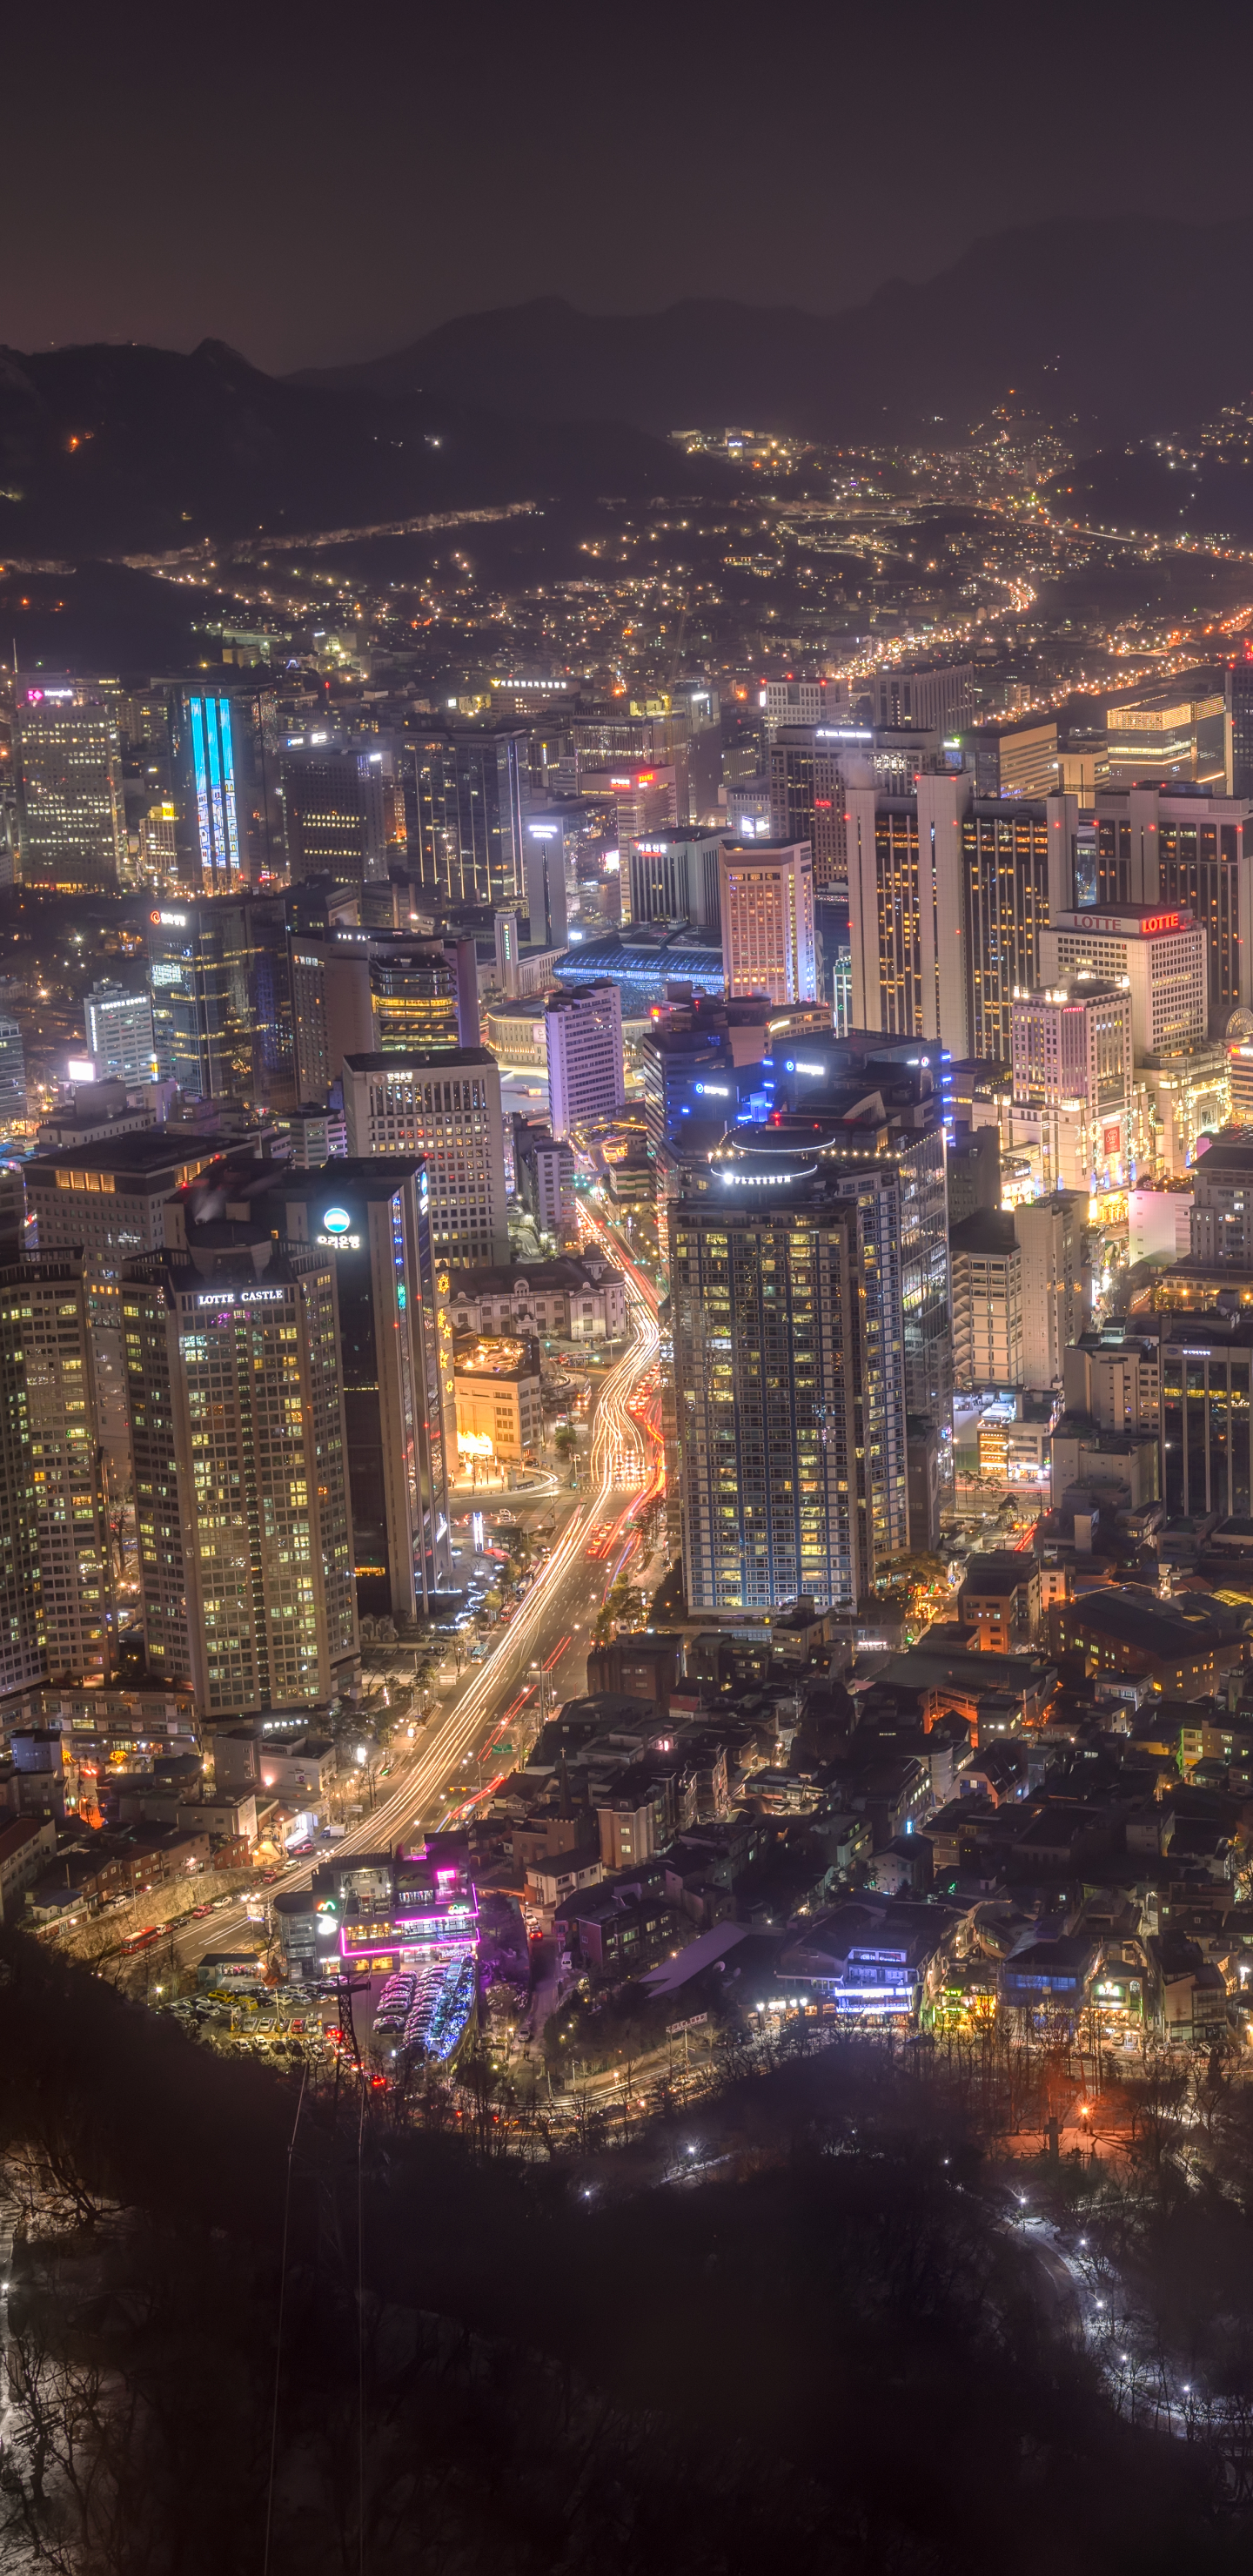 korea, seoul, megapolis, man made, cityscape, night, cities wallpapers for tablet